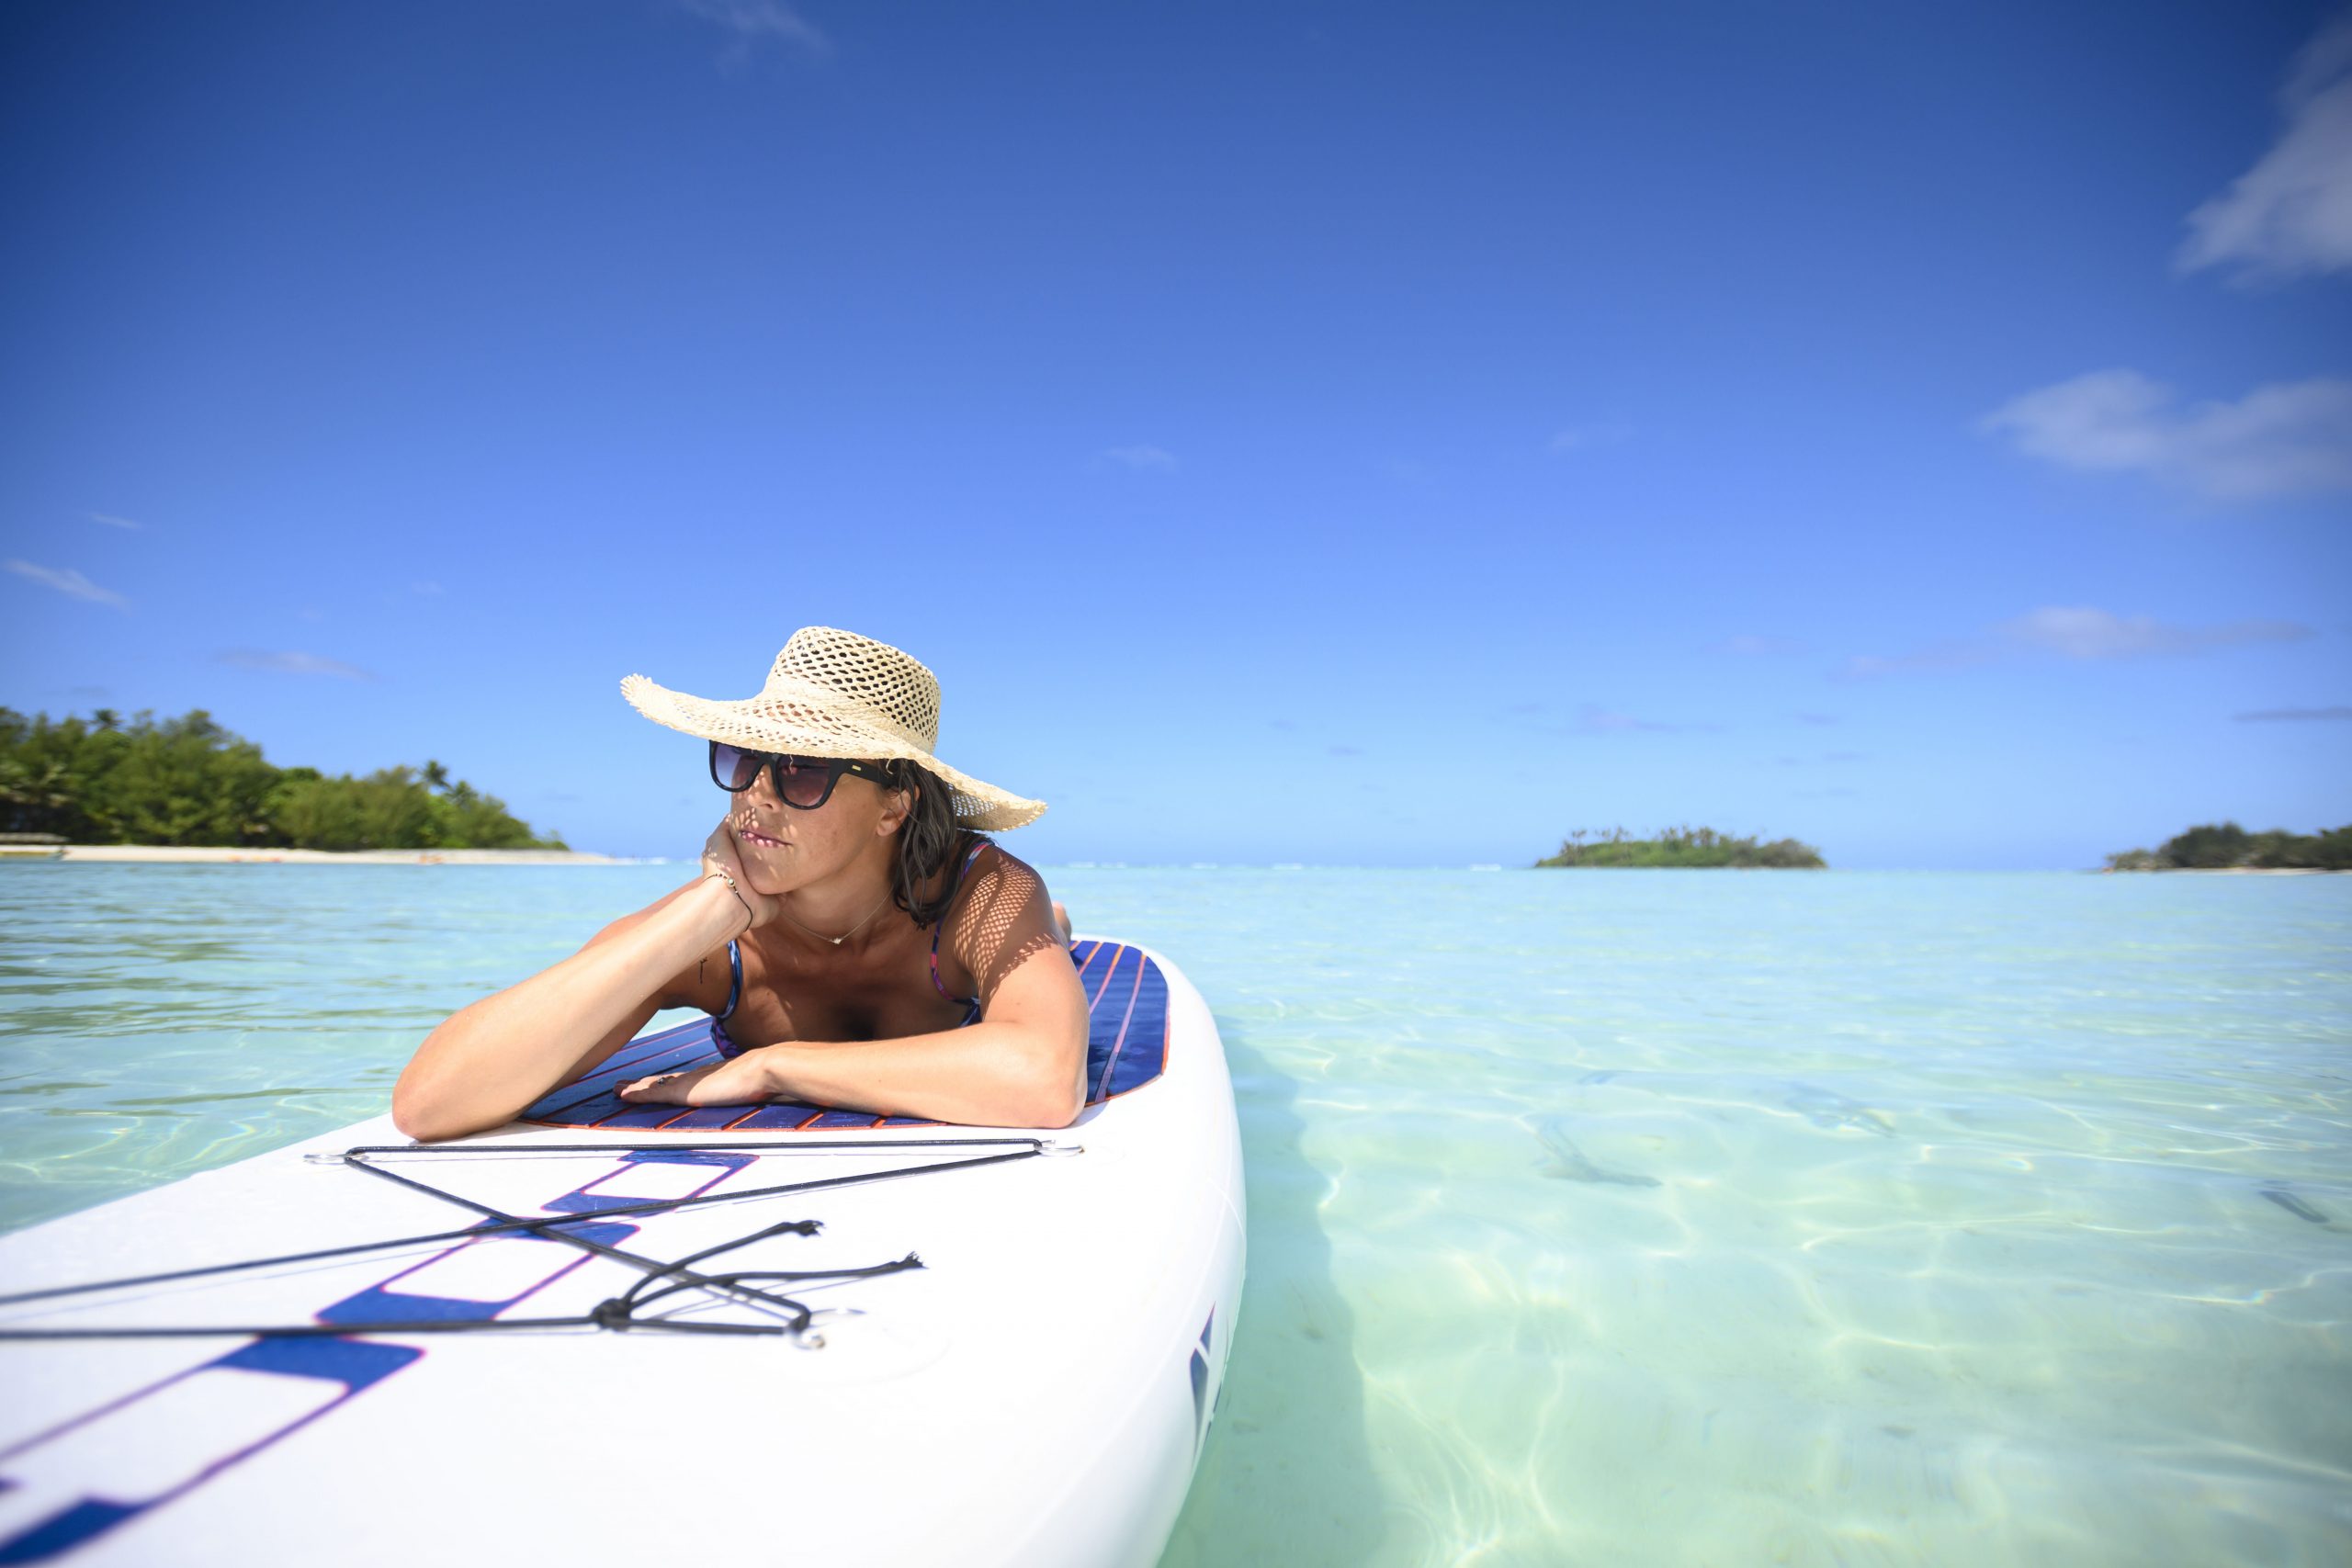 image of a lady sun-tanning on a stand up paddle board afloat in the lagoon